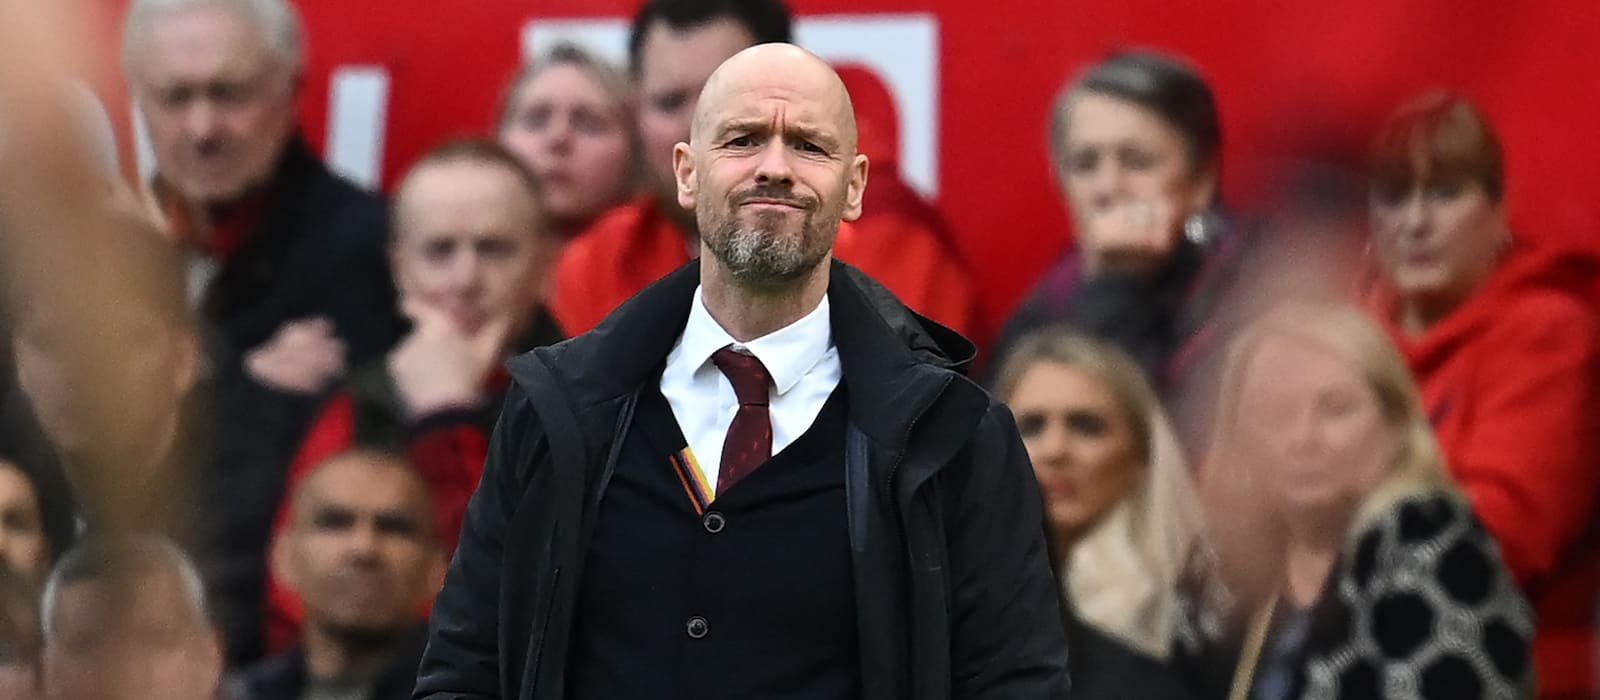 Gerard Pique says he’s doubtful Erik ten Hag can turn things around at Man United – Man United News And Transfer News